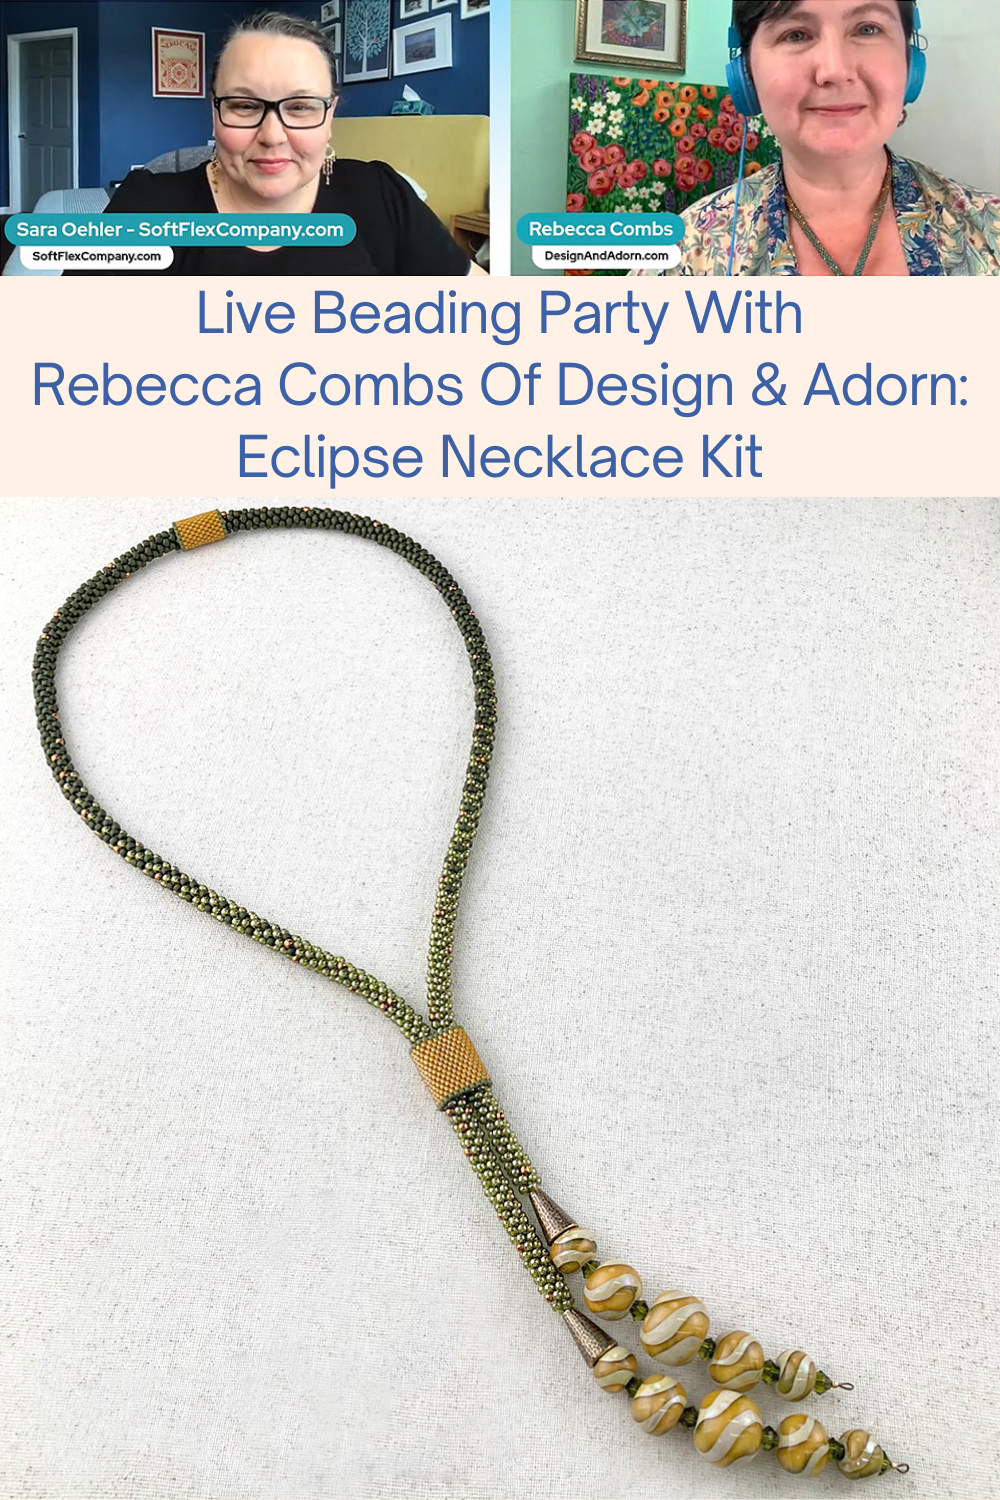 Live Beading Party With Rebecca Combs Of Design & Adorn Eclipse Necklace Kit Collage